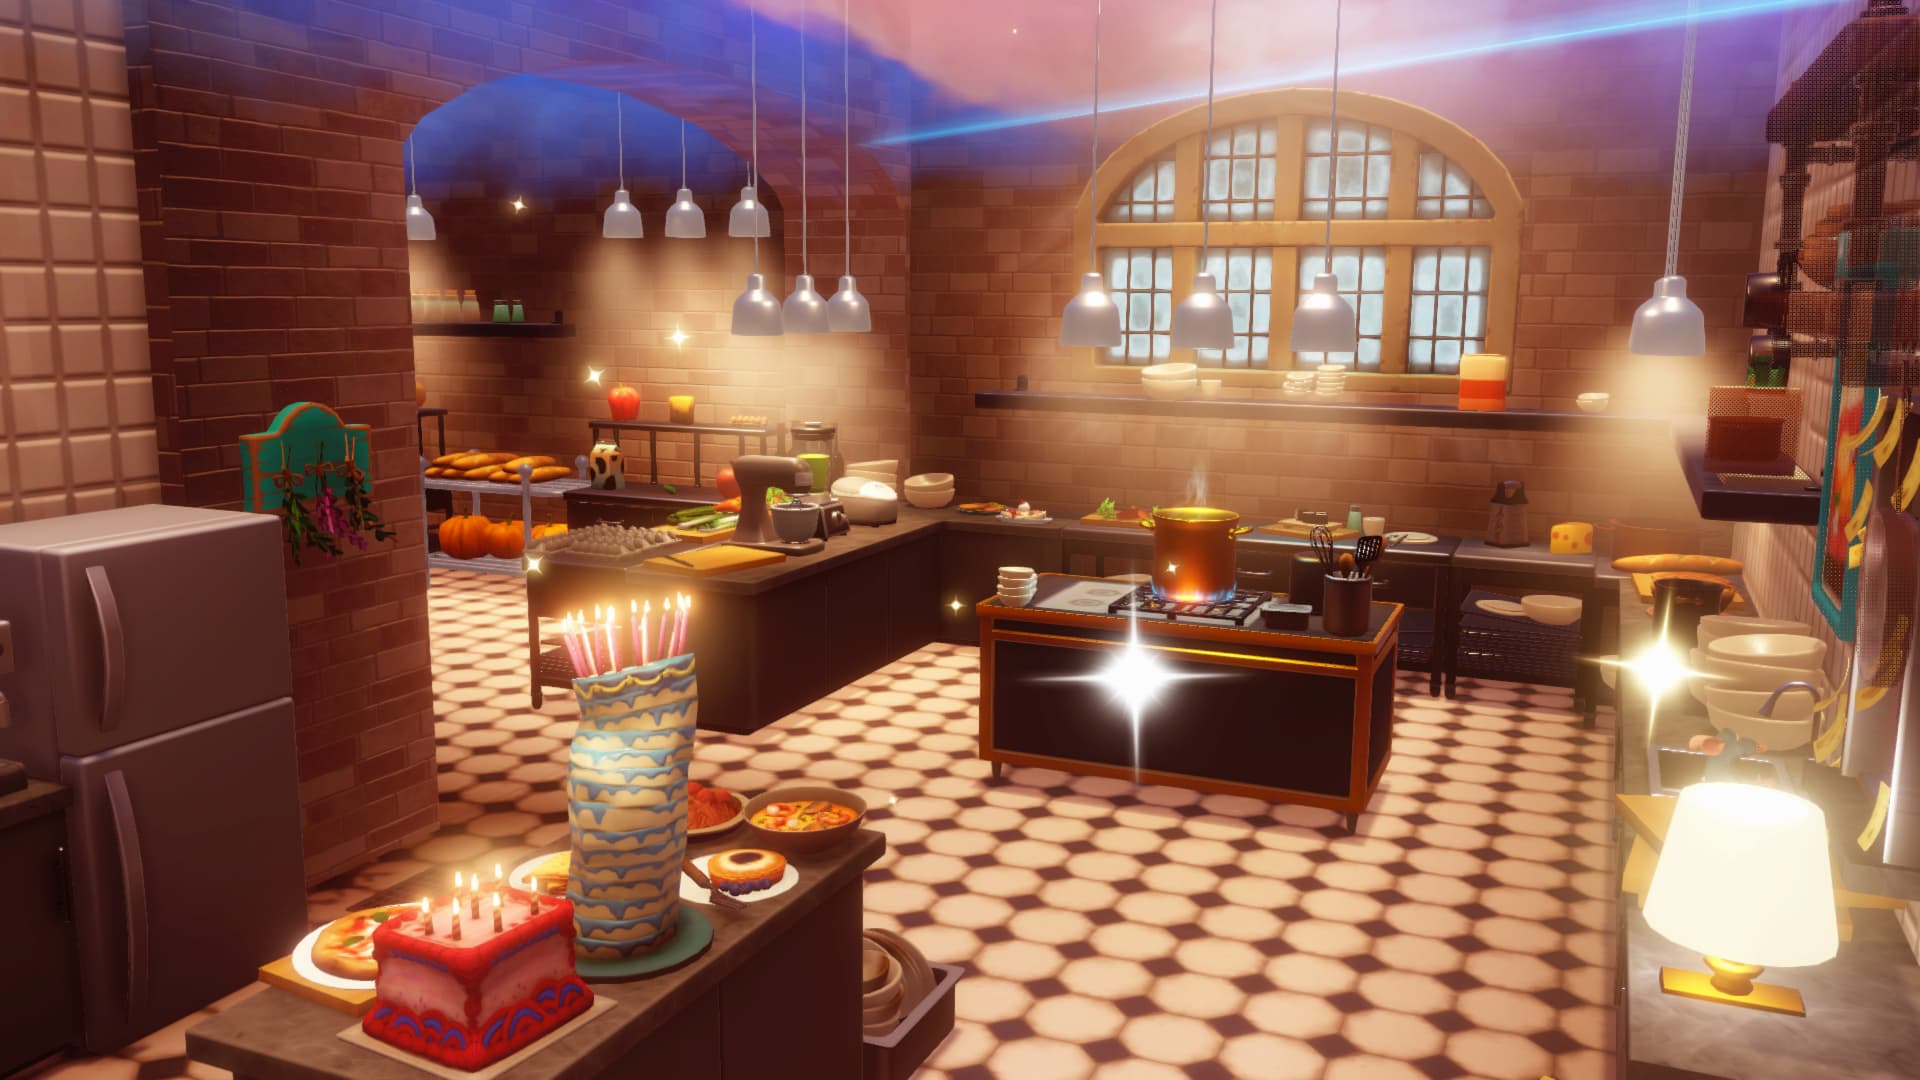 Screenshot of Remy's kitchen from the movie Ratatouille in the game Disney Dreamlight Valley, Disney Dreamlight Valley Remy Guide